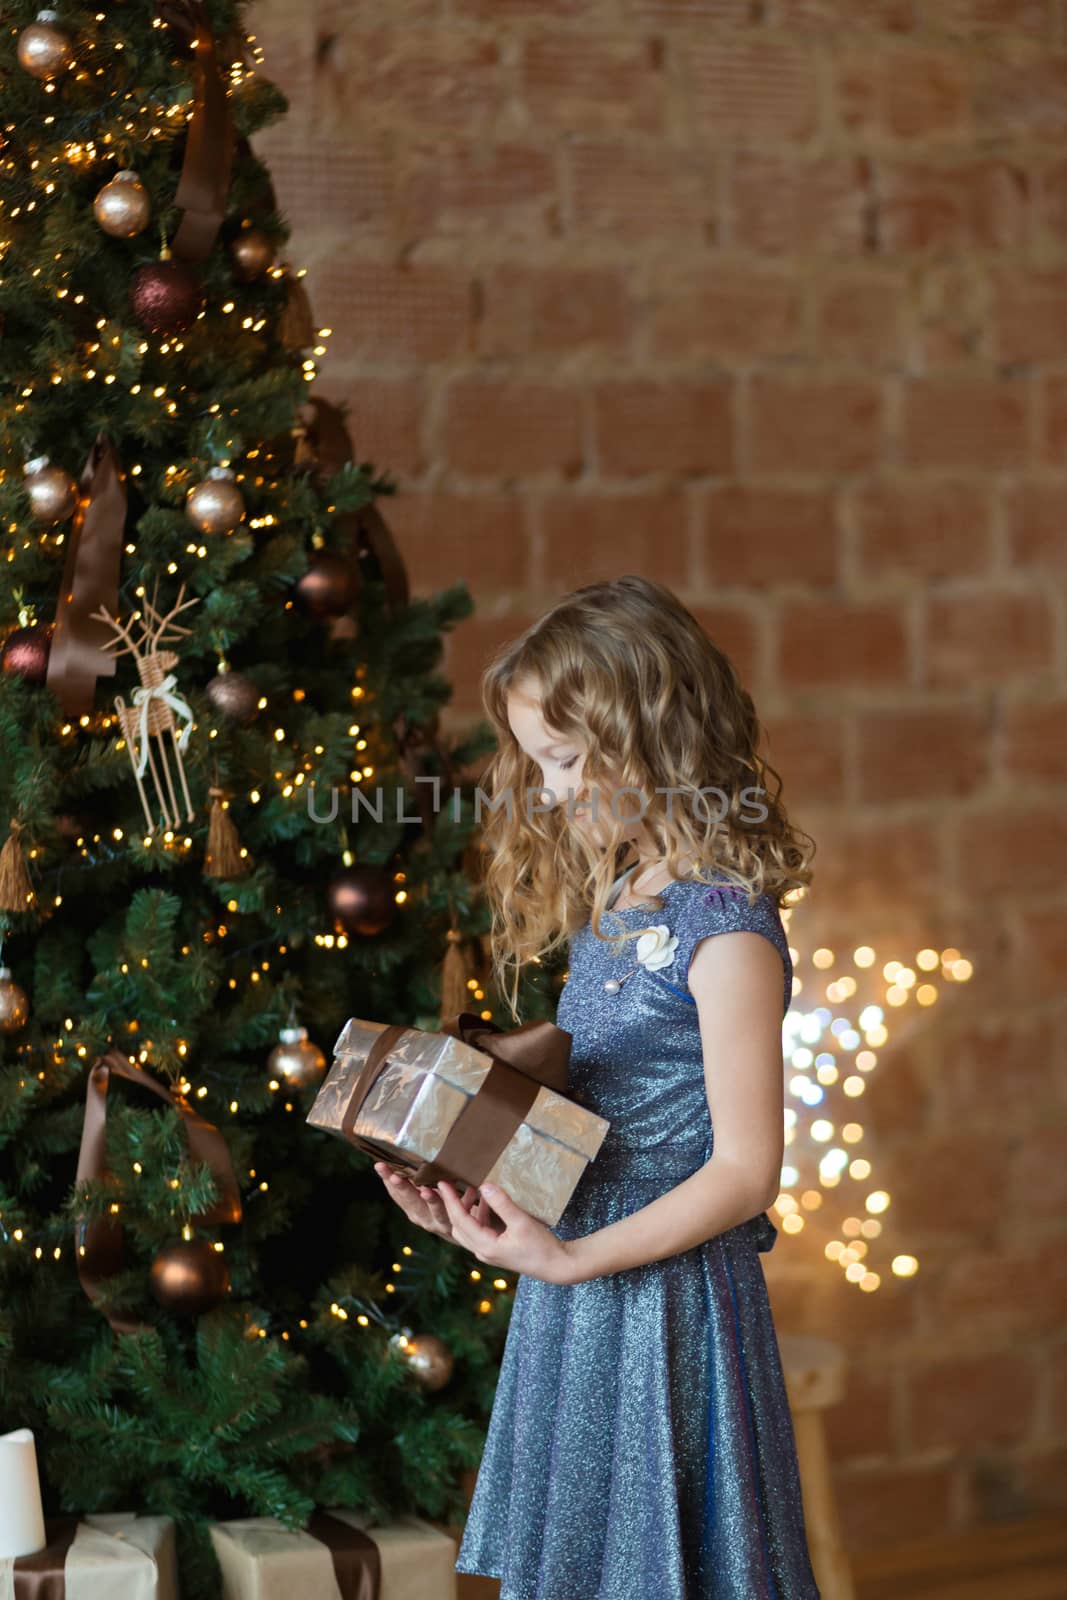 The adorable little girl in gorgeous dress holds gift box standing near Christmas tree.